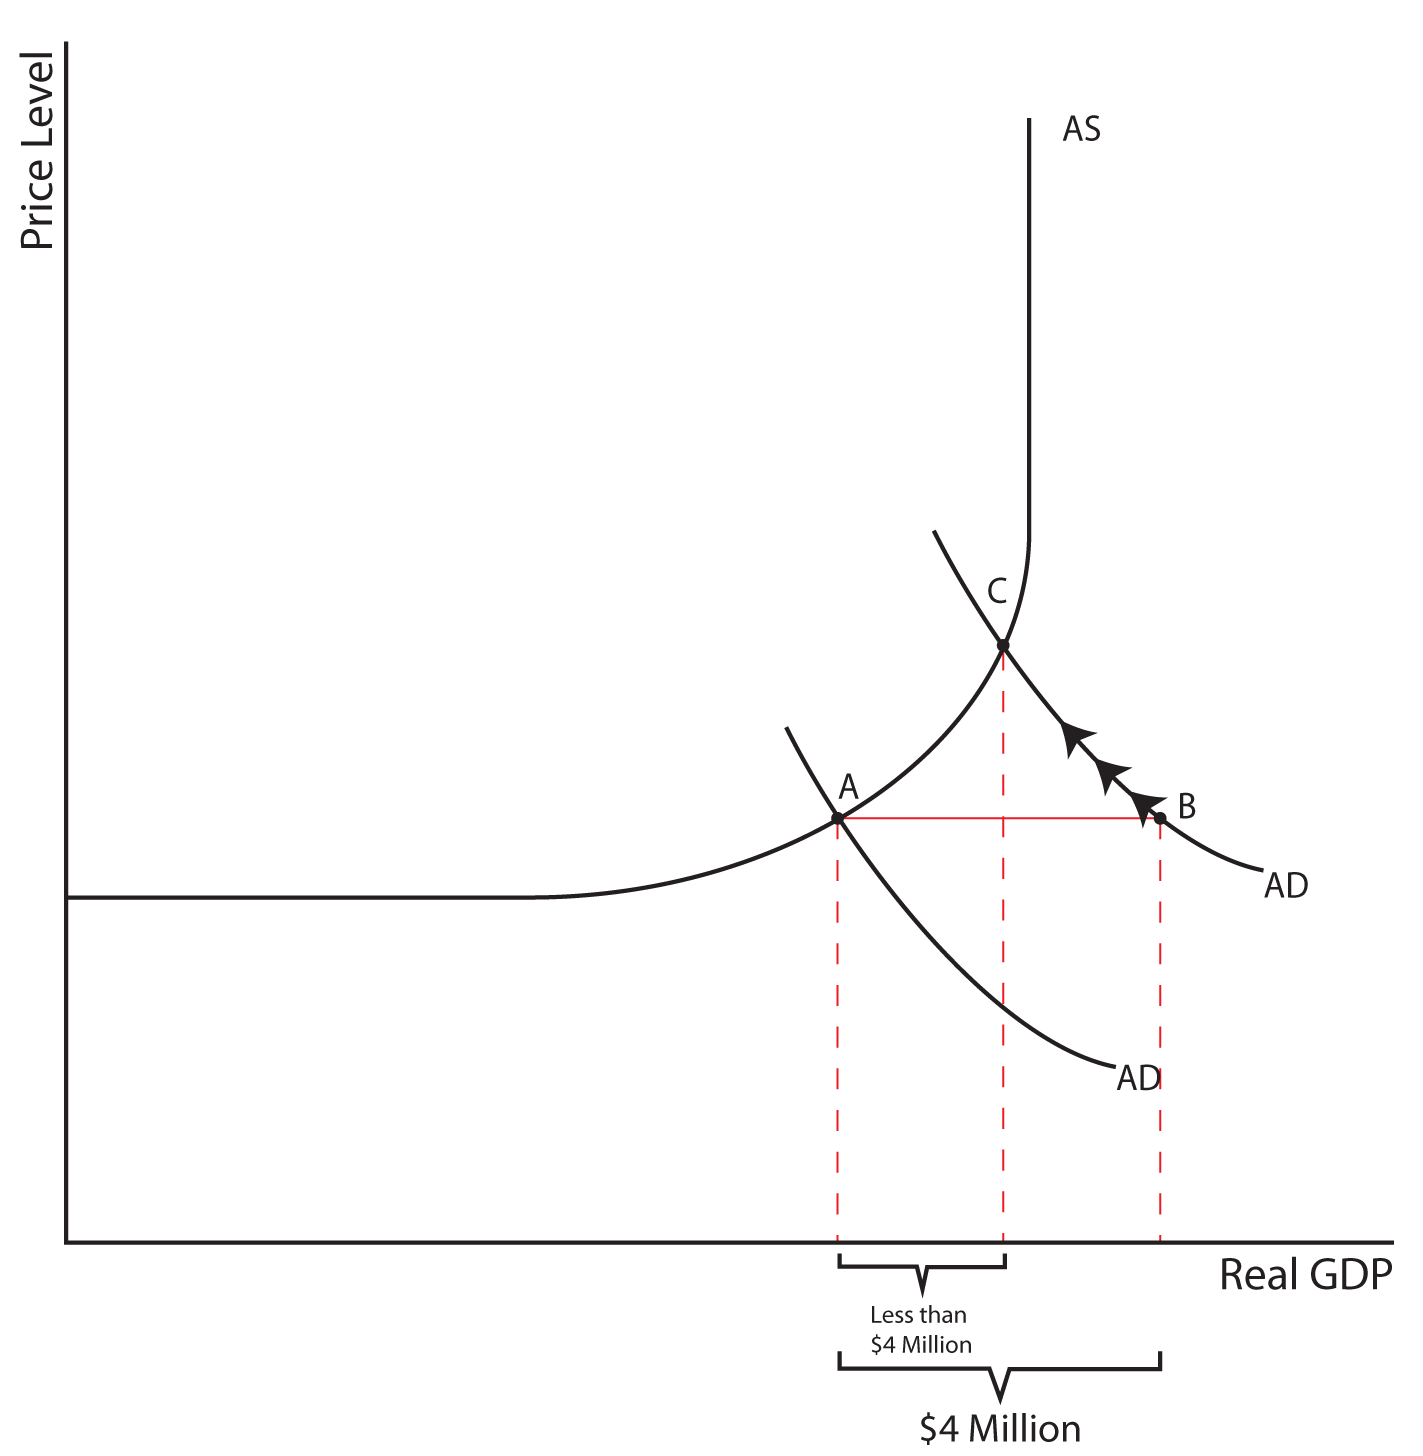 Image 9.02. This image depicts one graph. This graph's X axis is labeled Real GDP, and its Y axis is labeled Price Level. Just like the graph in Image 9.01, there is a solid black line that starts at a point on the lower half of the Y axis and extends horizontally before curving upward toward a vertical direction. This line is labeled AS, just like in Image 9.01 above. Also like Image 9.01, there are two curved black lines that are each labeled AD. However, in this image, the two AD lines are located farther down the X axis, causing them to cross line AS at the part where it is curving upward (before it becomes vertical). The two AD lines are still the same distance apart, and the first AD line, which is located lower on the X axis, crosses line AS at a point labeled A. The second AD line, which is located above higher values on the X axis, crosses line AS at a point labeled C. From point A, a red solid line extends horizontally towards increasing values on the X axis until it touches the second AD line at a point labeled B. On the graph, then, from left to right, are the points A, C, and B. From each of these points, a red dotted line descends until it reaches the X axis. The distance between point A and point B is labeled as $4 Million. The distance between point A and point C is labeled as Less than $4 Million.